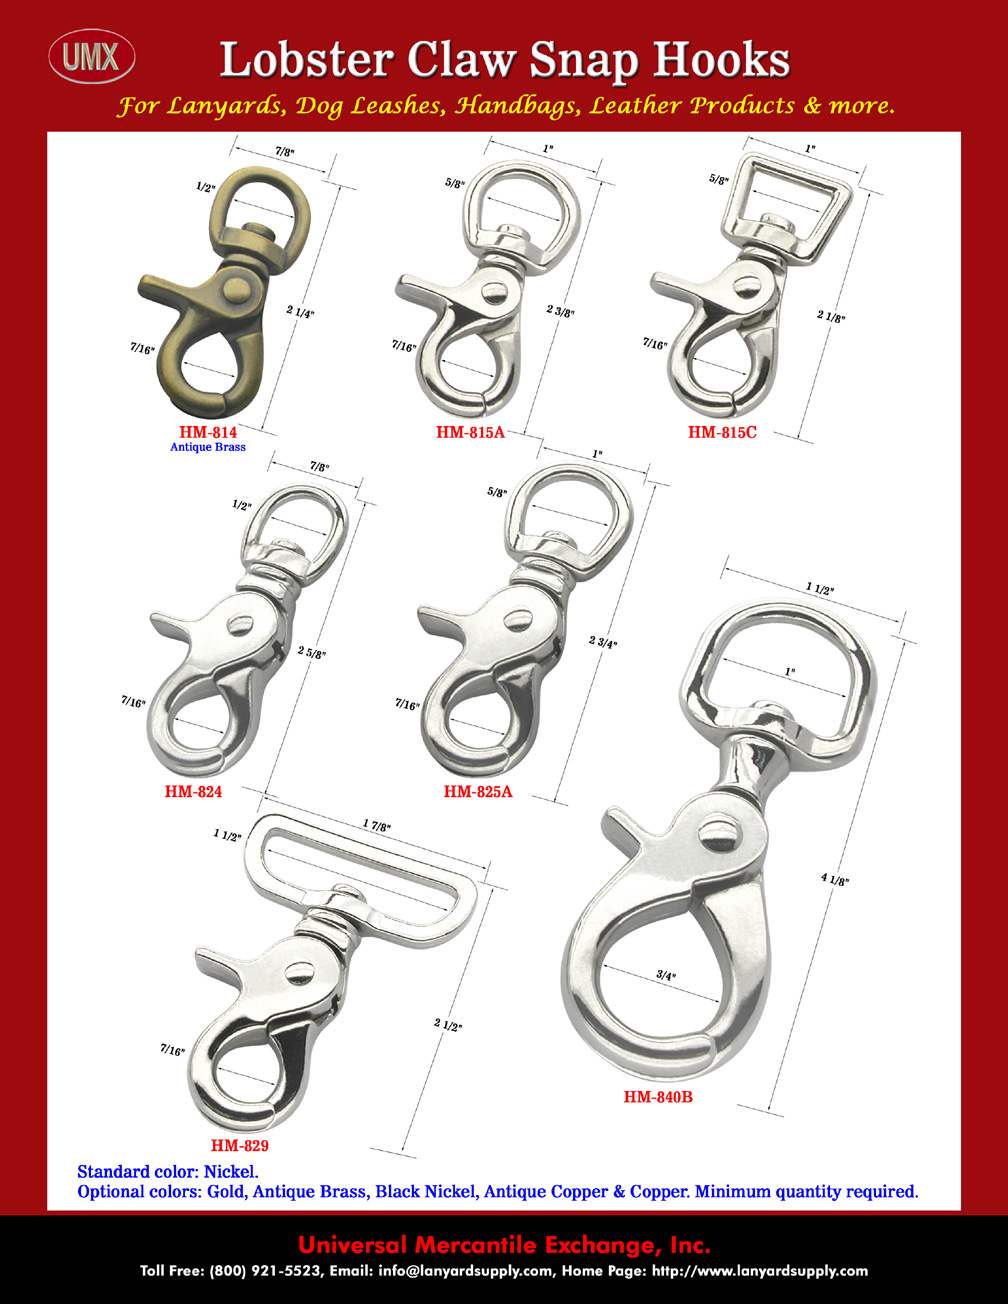 Medium to Big Size Lobster Snap Hooks - Schematic Drawing